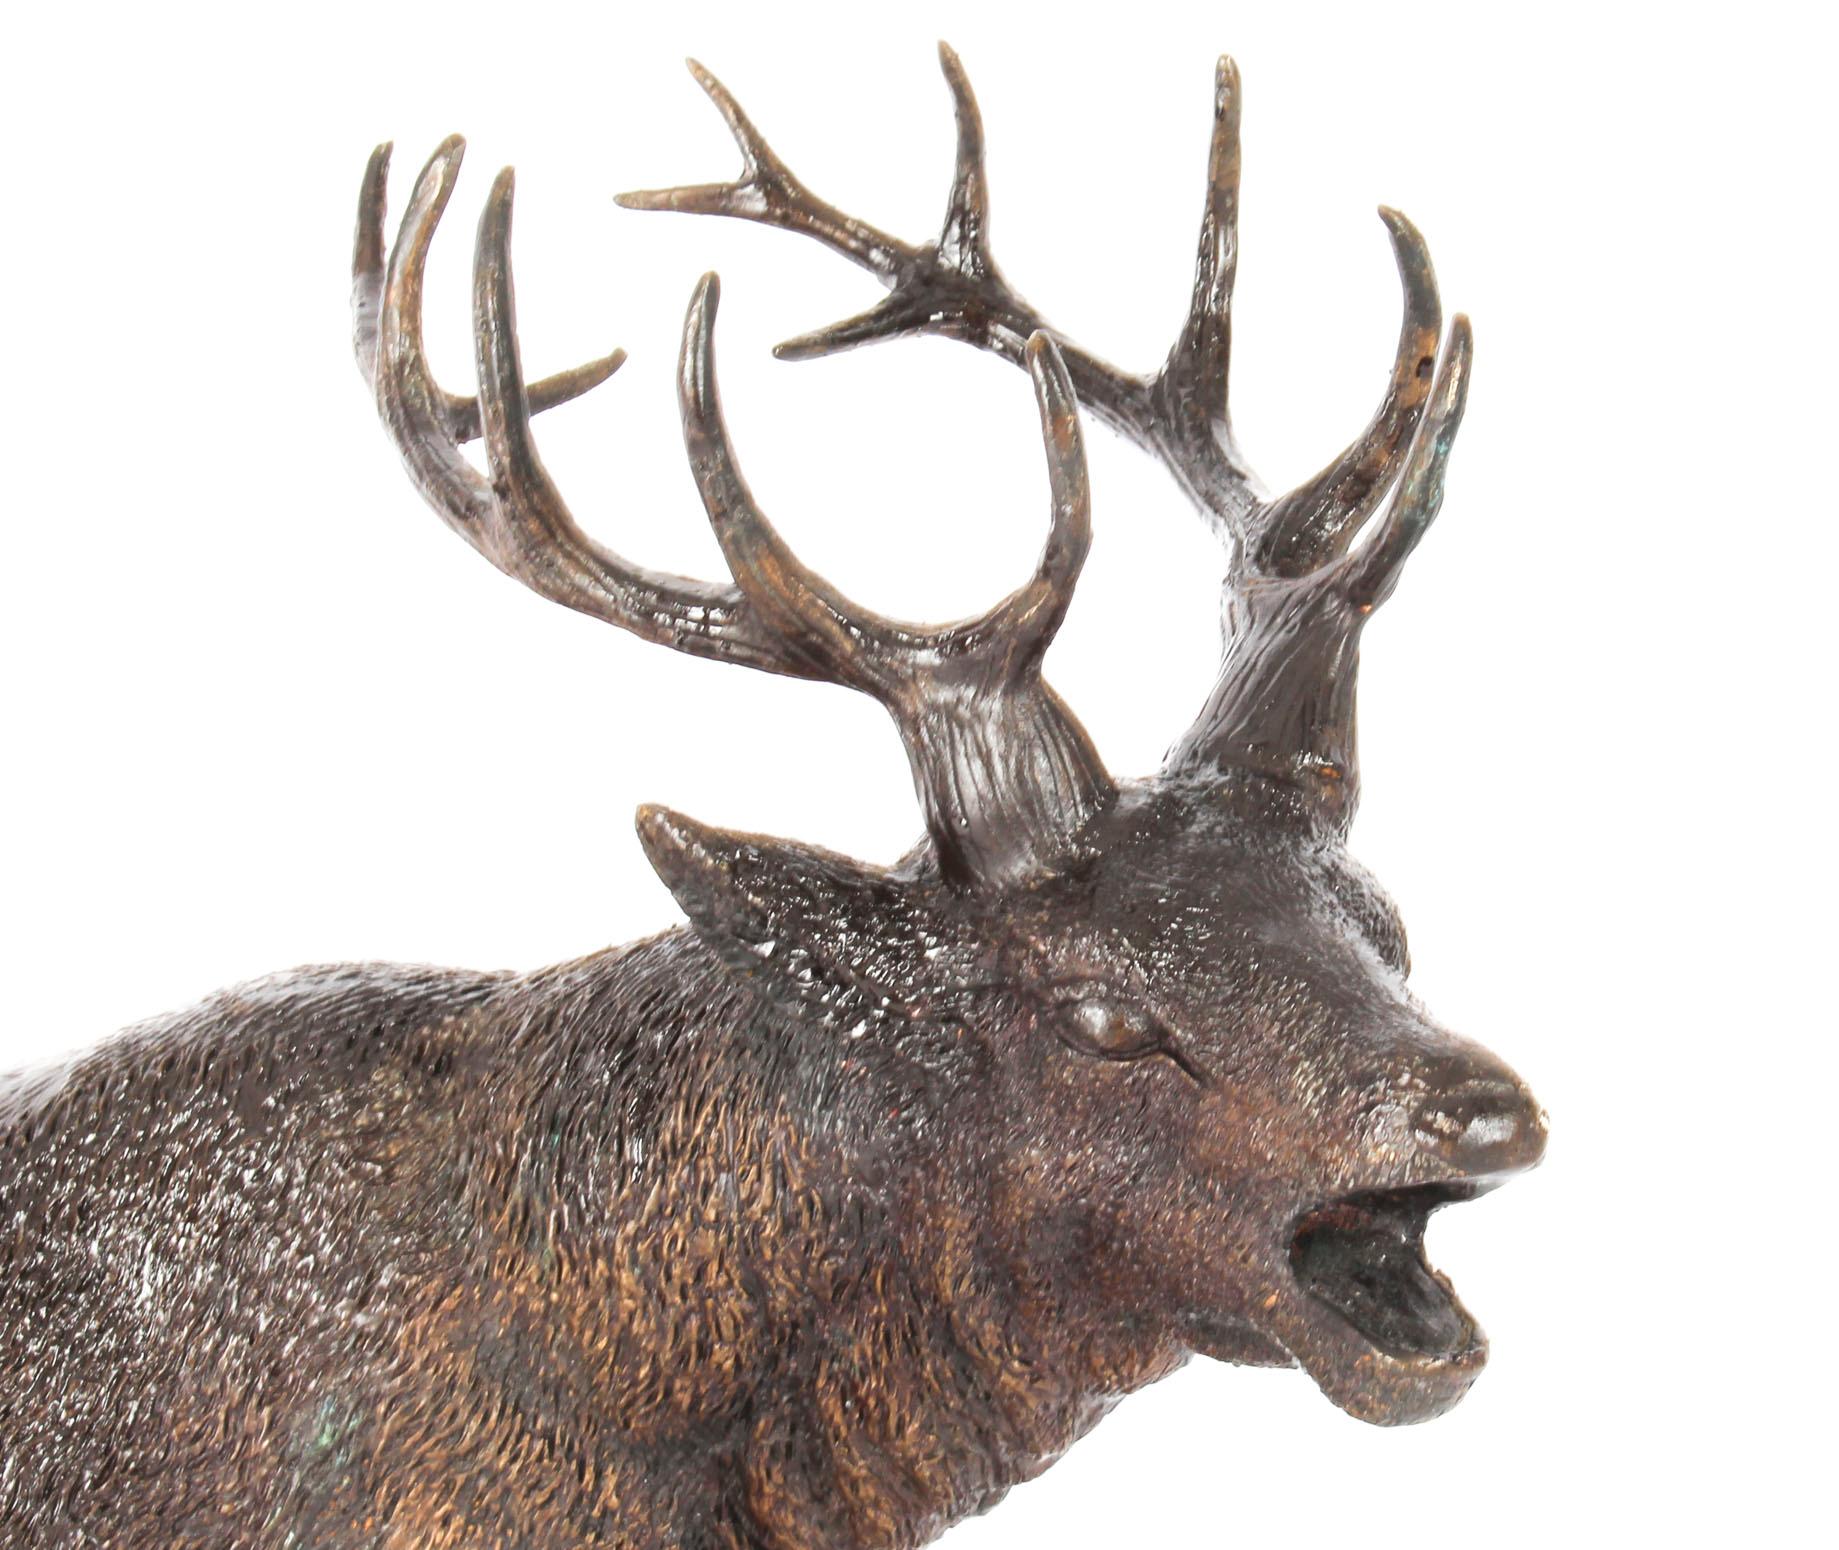 This is a very rare French bronze animalier sculpture of a stag by Christopher Fratin, circa 1840 in date.

The superbly modeled and cast bronze bellowing stag is standing alert and ready to charge.

It features a finely detailed naturalistic